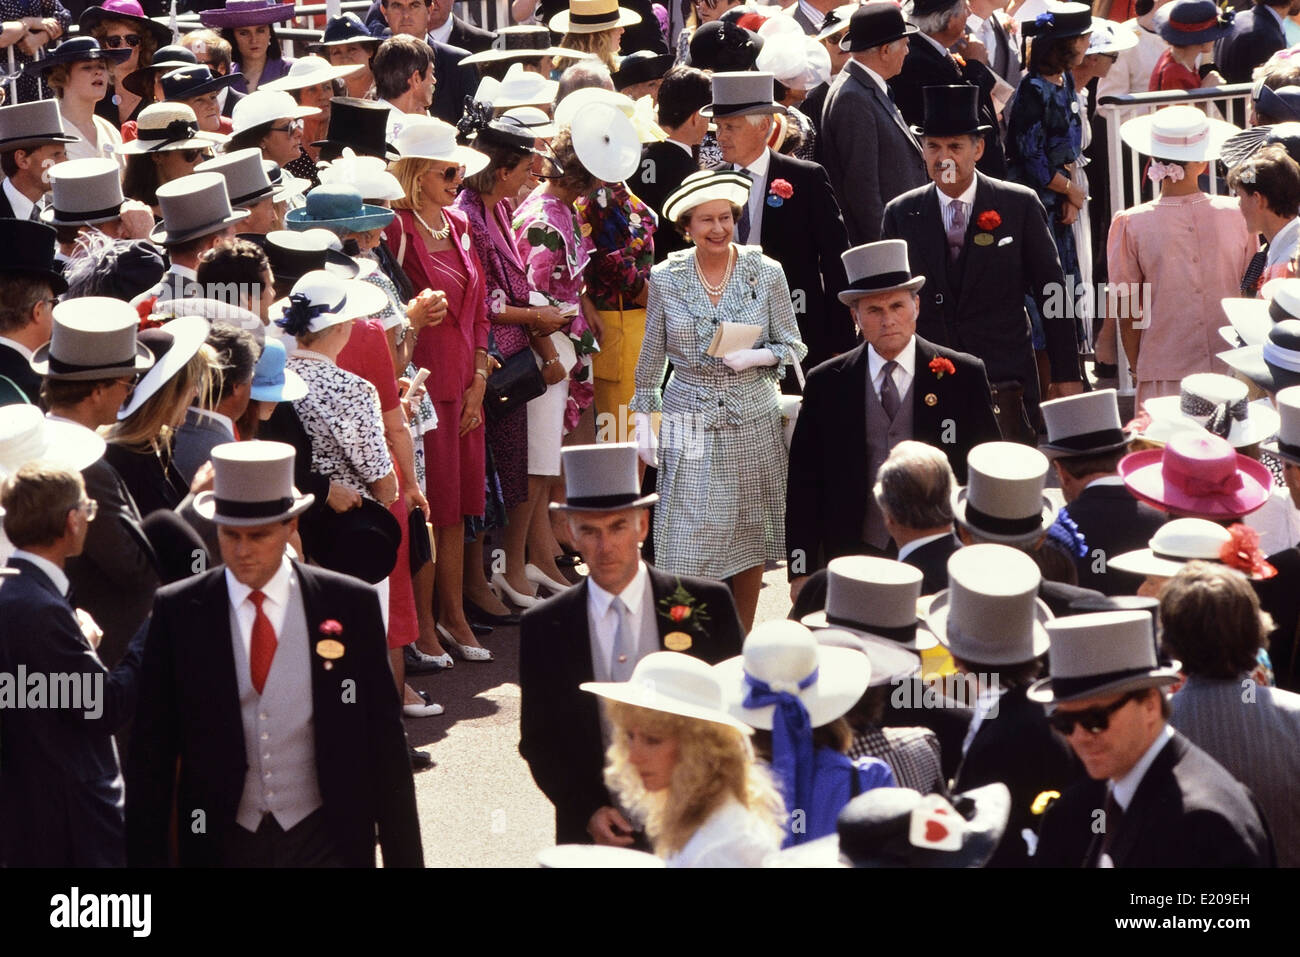 A smiling Queen Elizabeth II walking through the crowds race at Royal Ascot Races , Berkshire, England, UK. circa 1989 Stock Photo